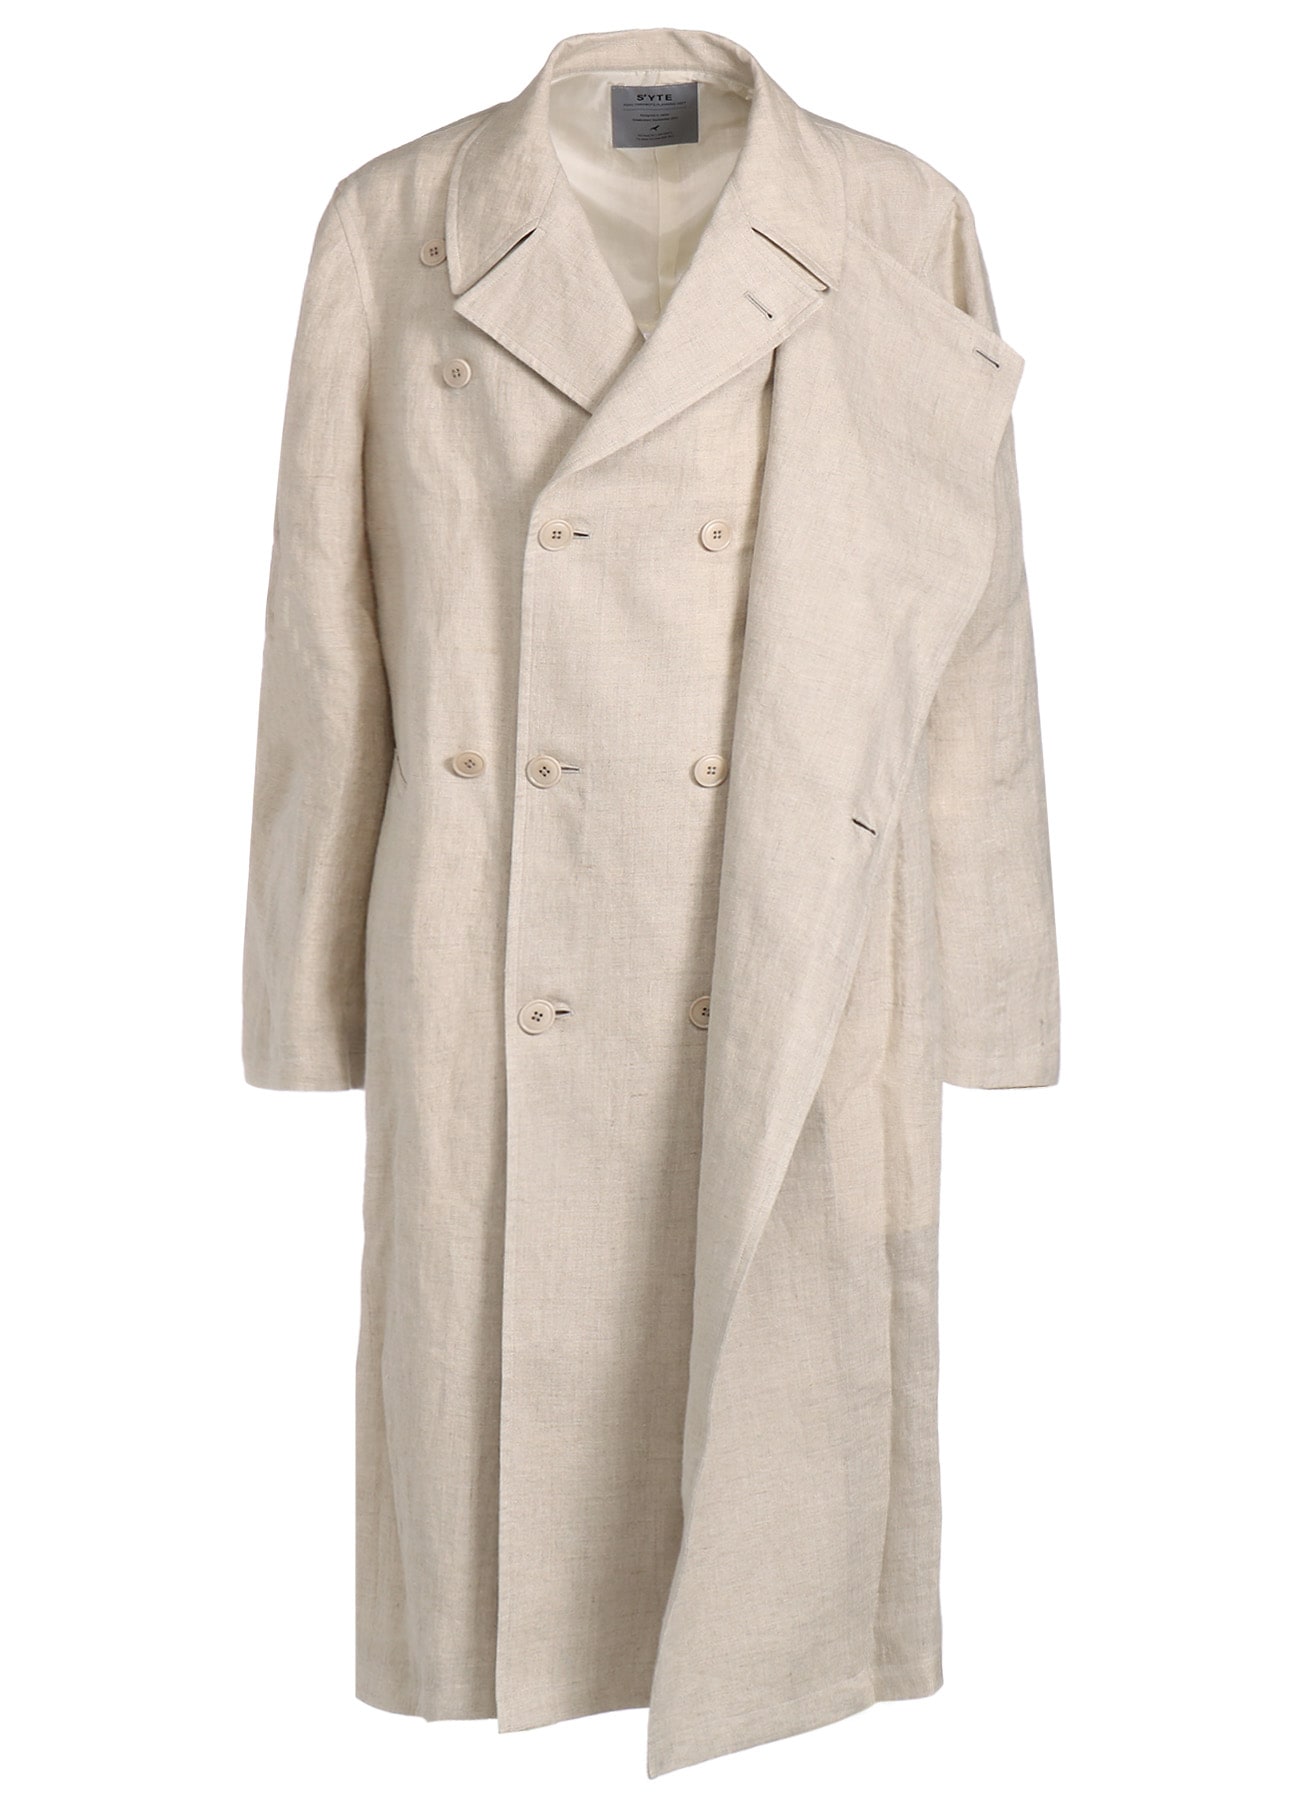 LINEN GAUZE DOUBLE-BREASTED COAT WITH DOUBLE-TAILORED LEFT FRONT(M 